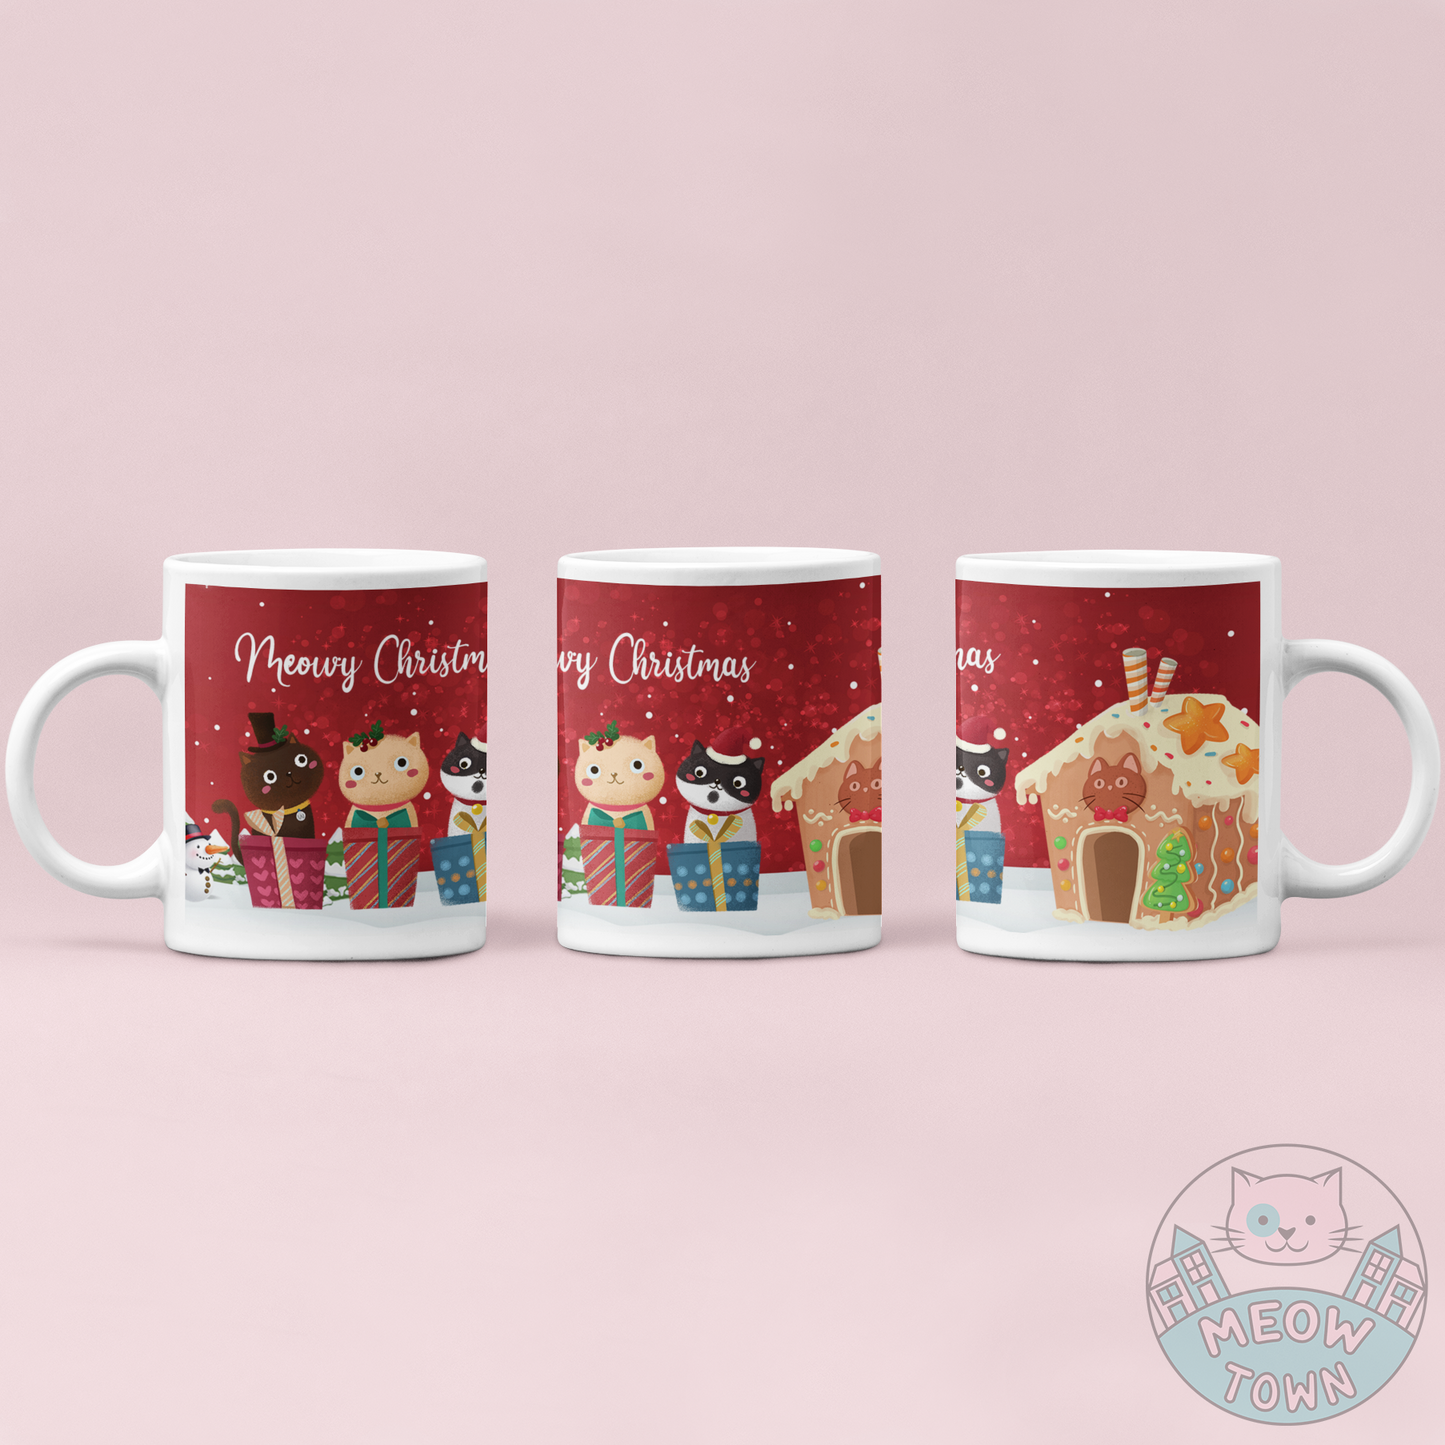 A lovely Christmas themed ceramic mug from our exclusive Meow Town Special collection. Sip your favourite hot drink from this stylish coffee mug, printed with festive kitty design. This 11oz mug is made of brilliant white ceramic material. They are easy to clean, microwave-safe. This mug can be a perfect Christmas gift for any cat lover!